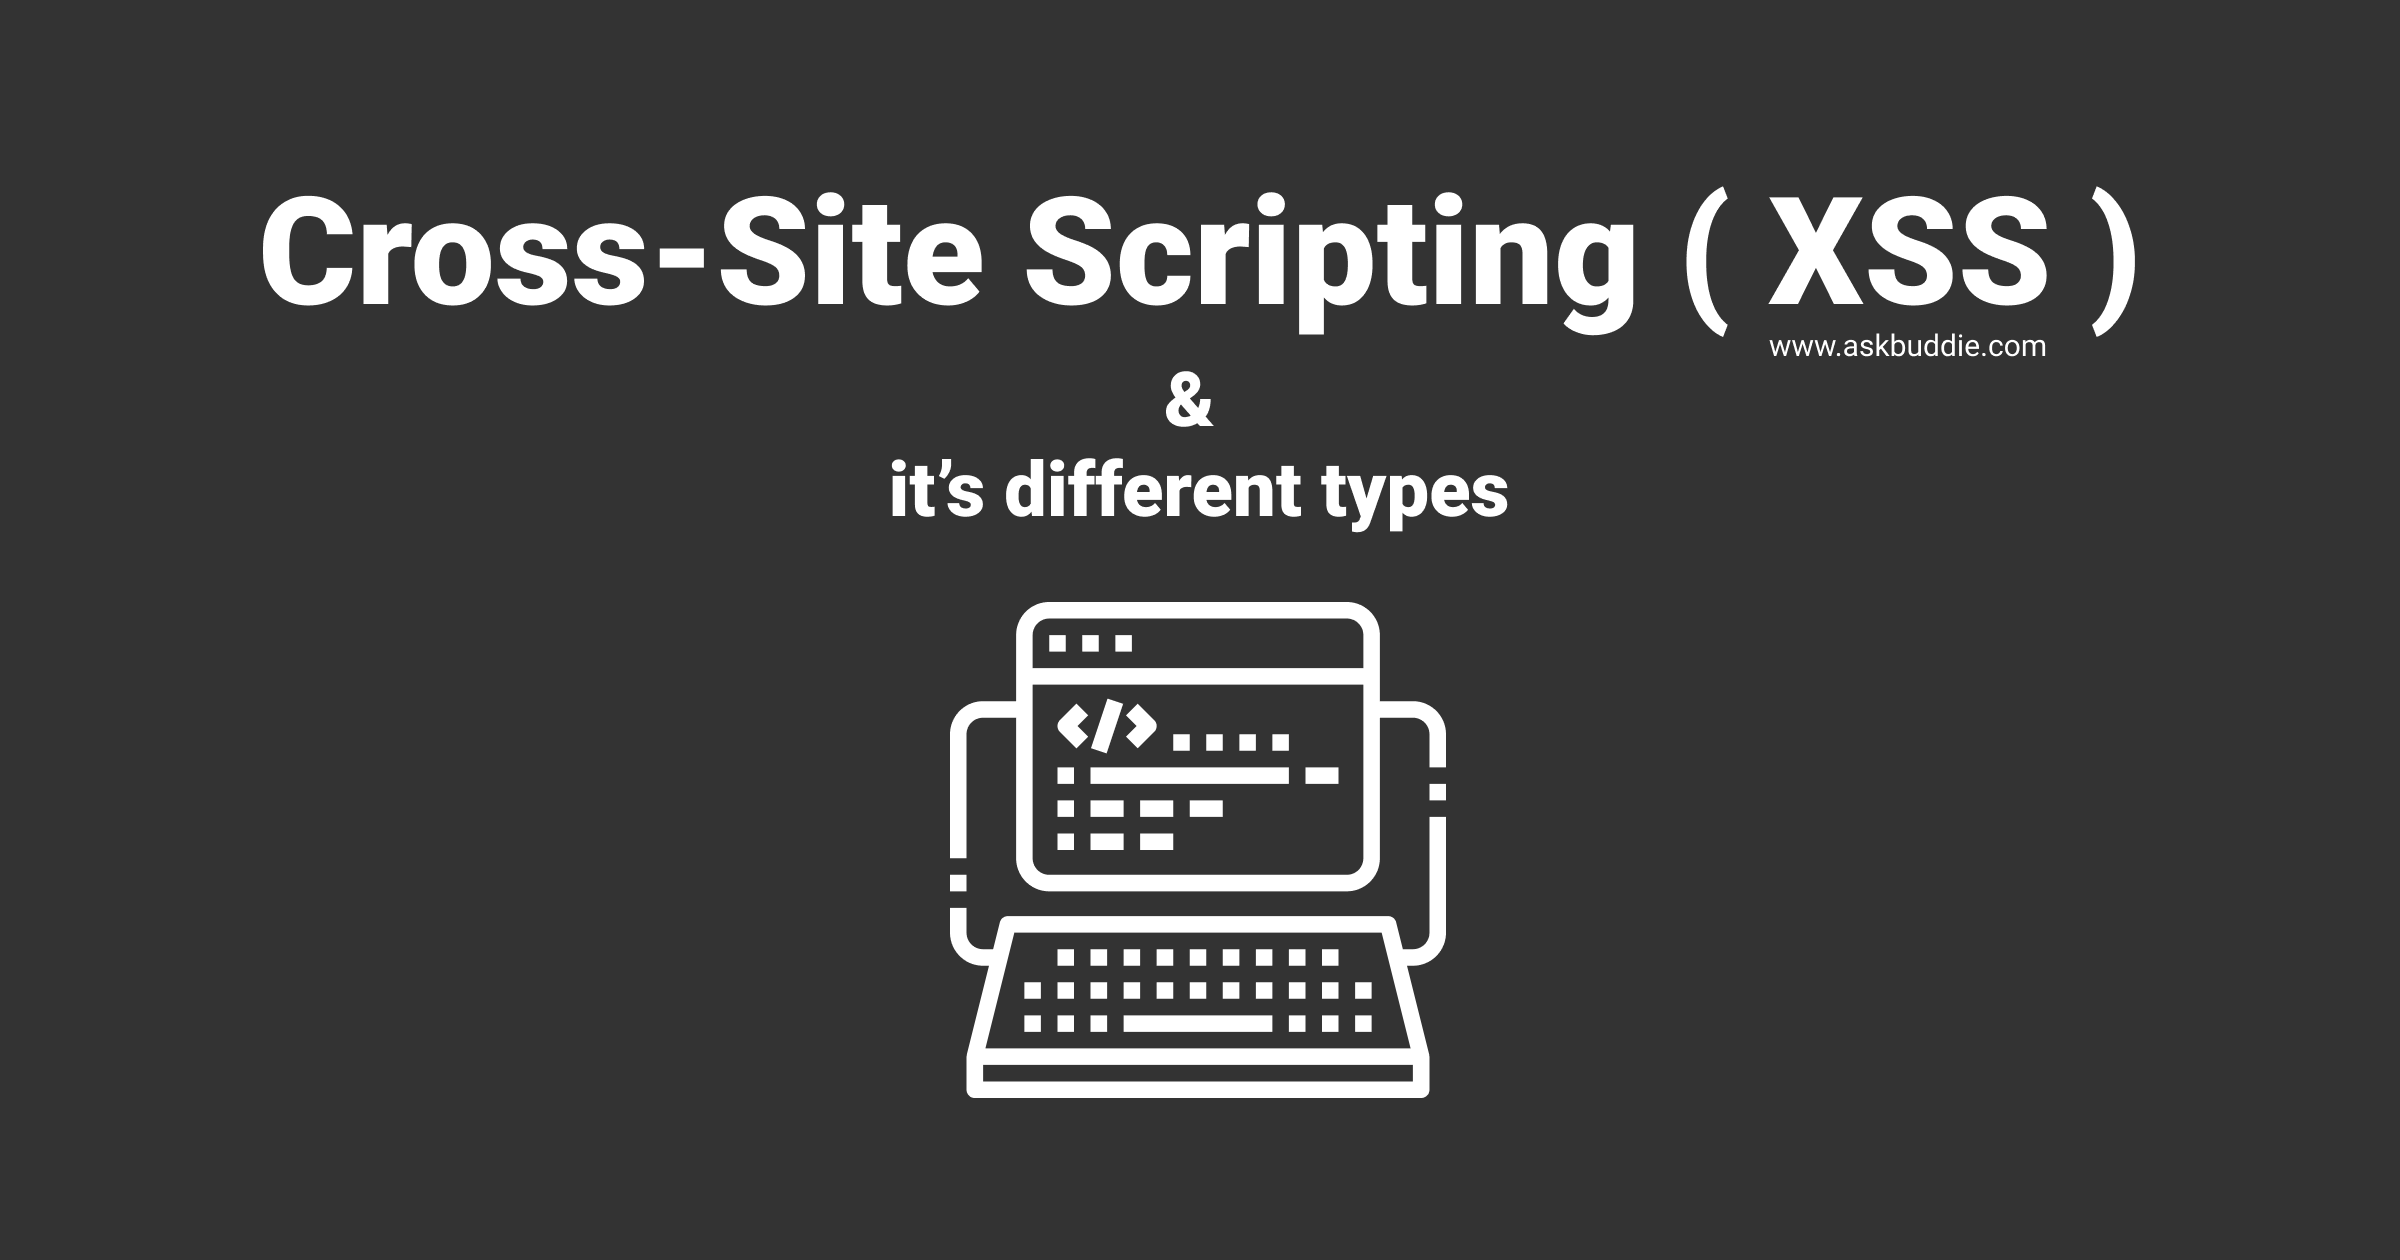 Cross Site Scripting ( XSS ) and its types